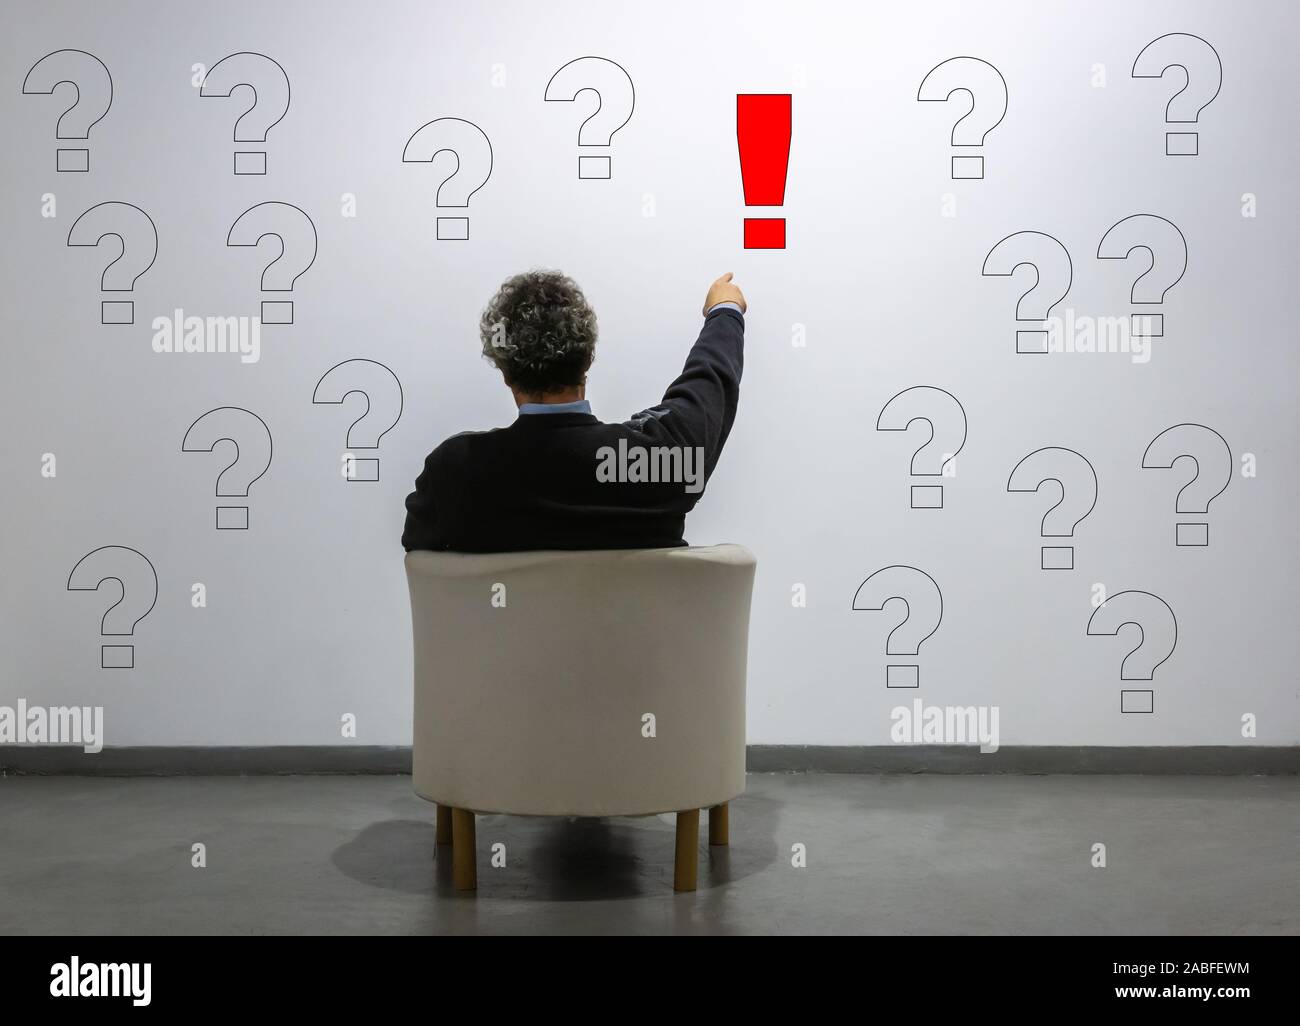 a man points to an exclamation point among many question marks. concept of idea, certainty, solution Stock Photo